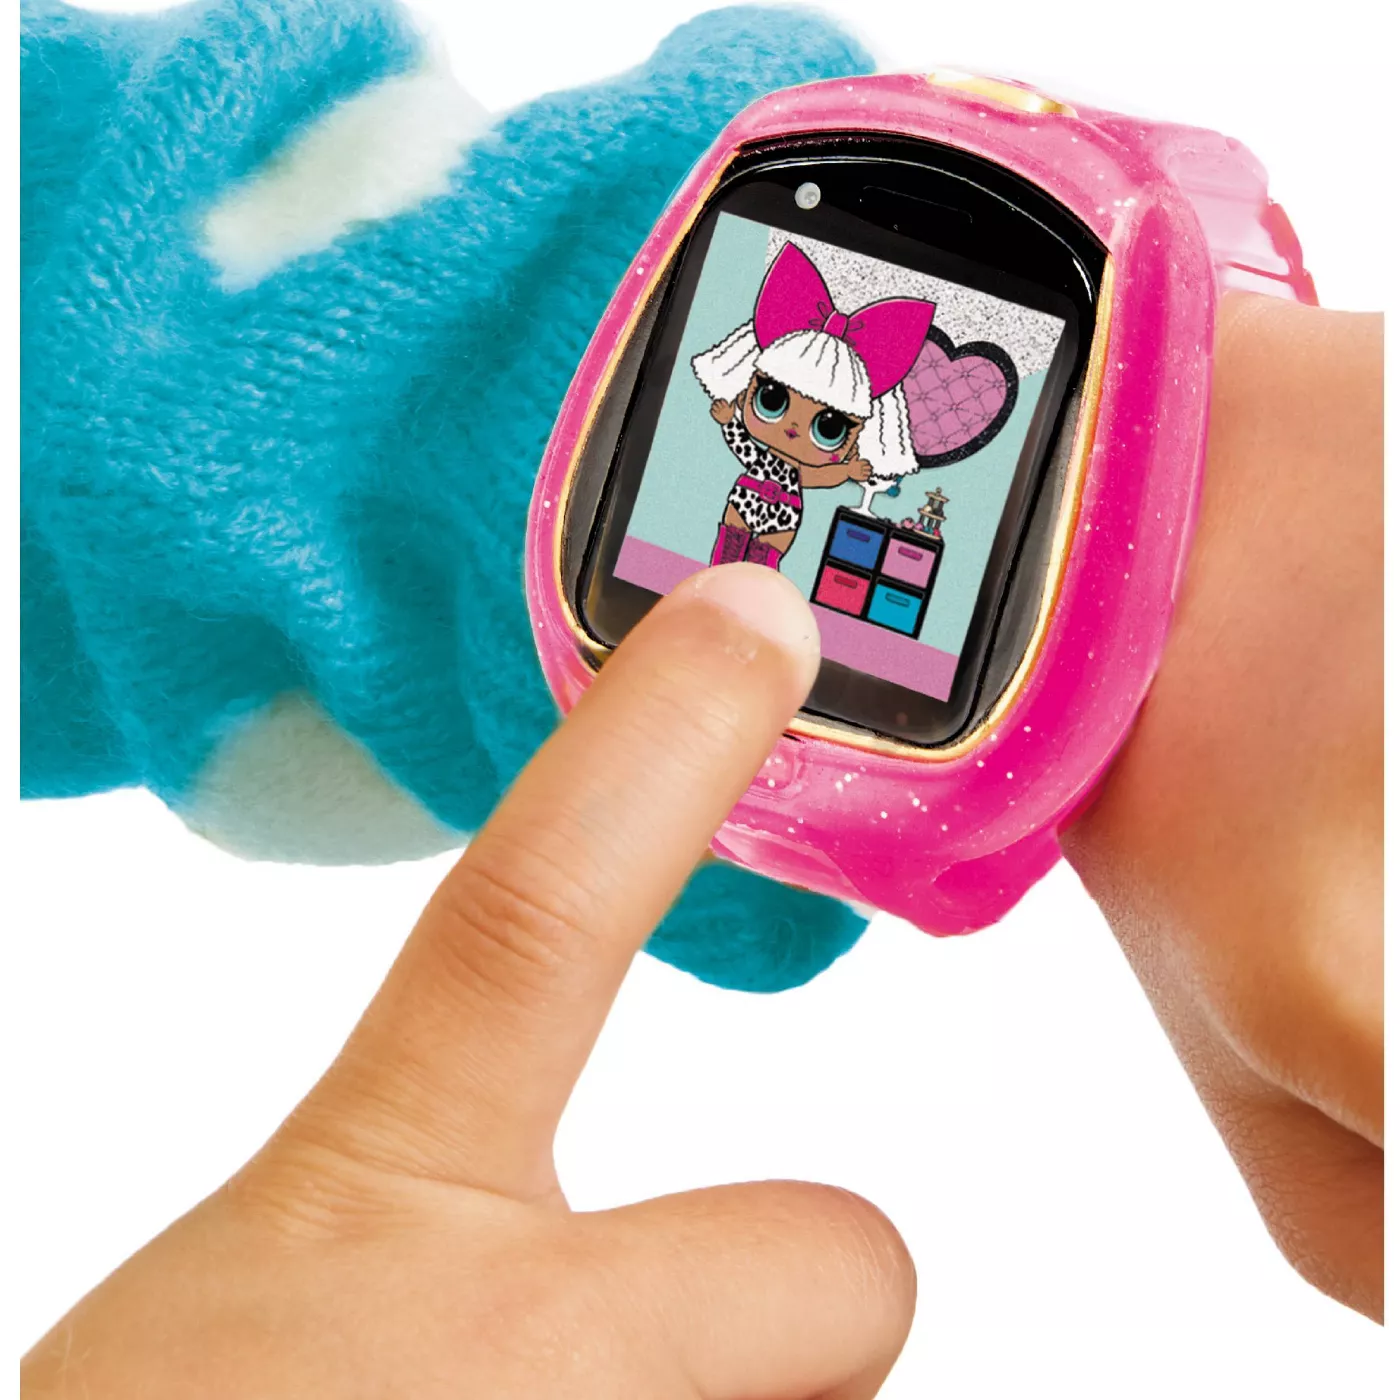 L.O.L. Surprise! Smartwatch! Pink -  Camera, Video, Games, Activities an... - £15.62 GBP